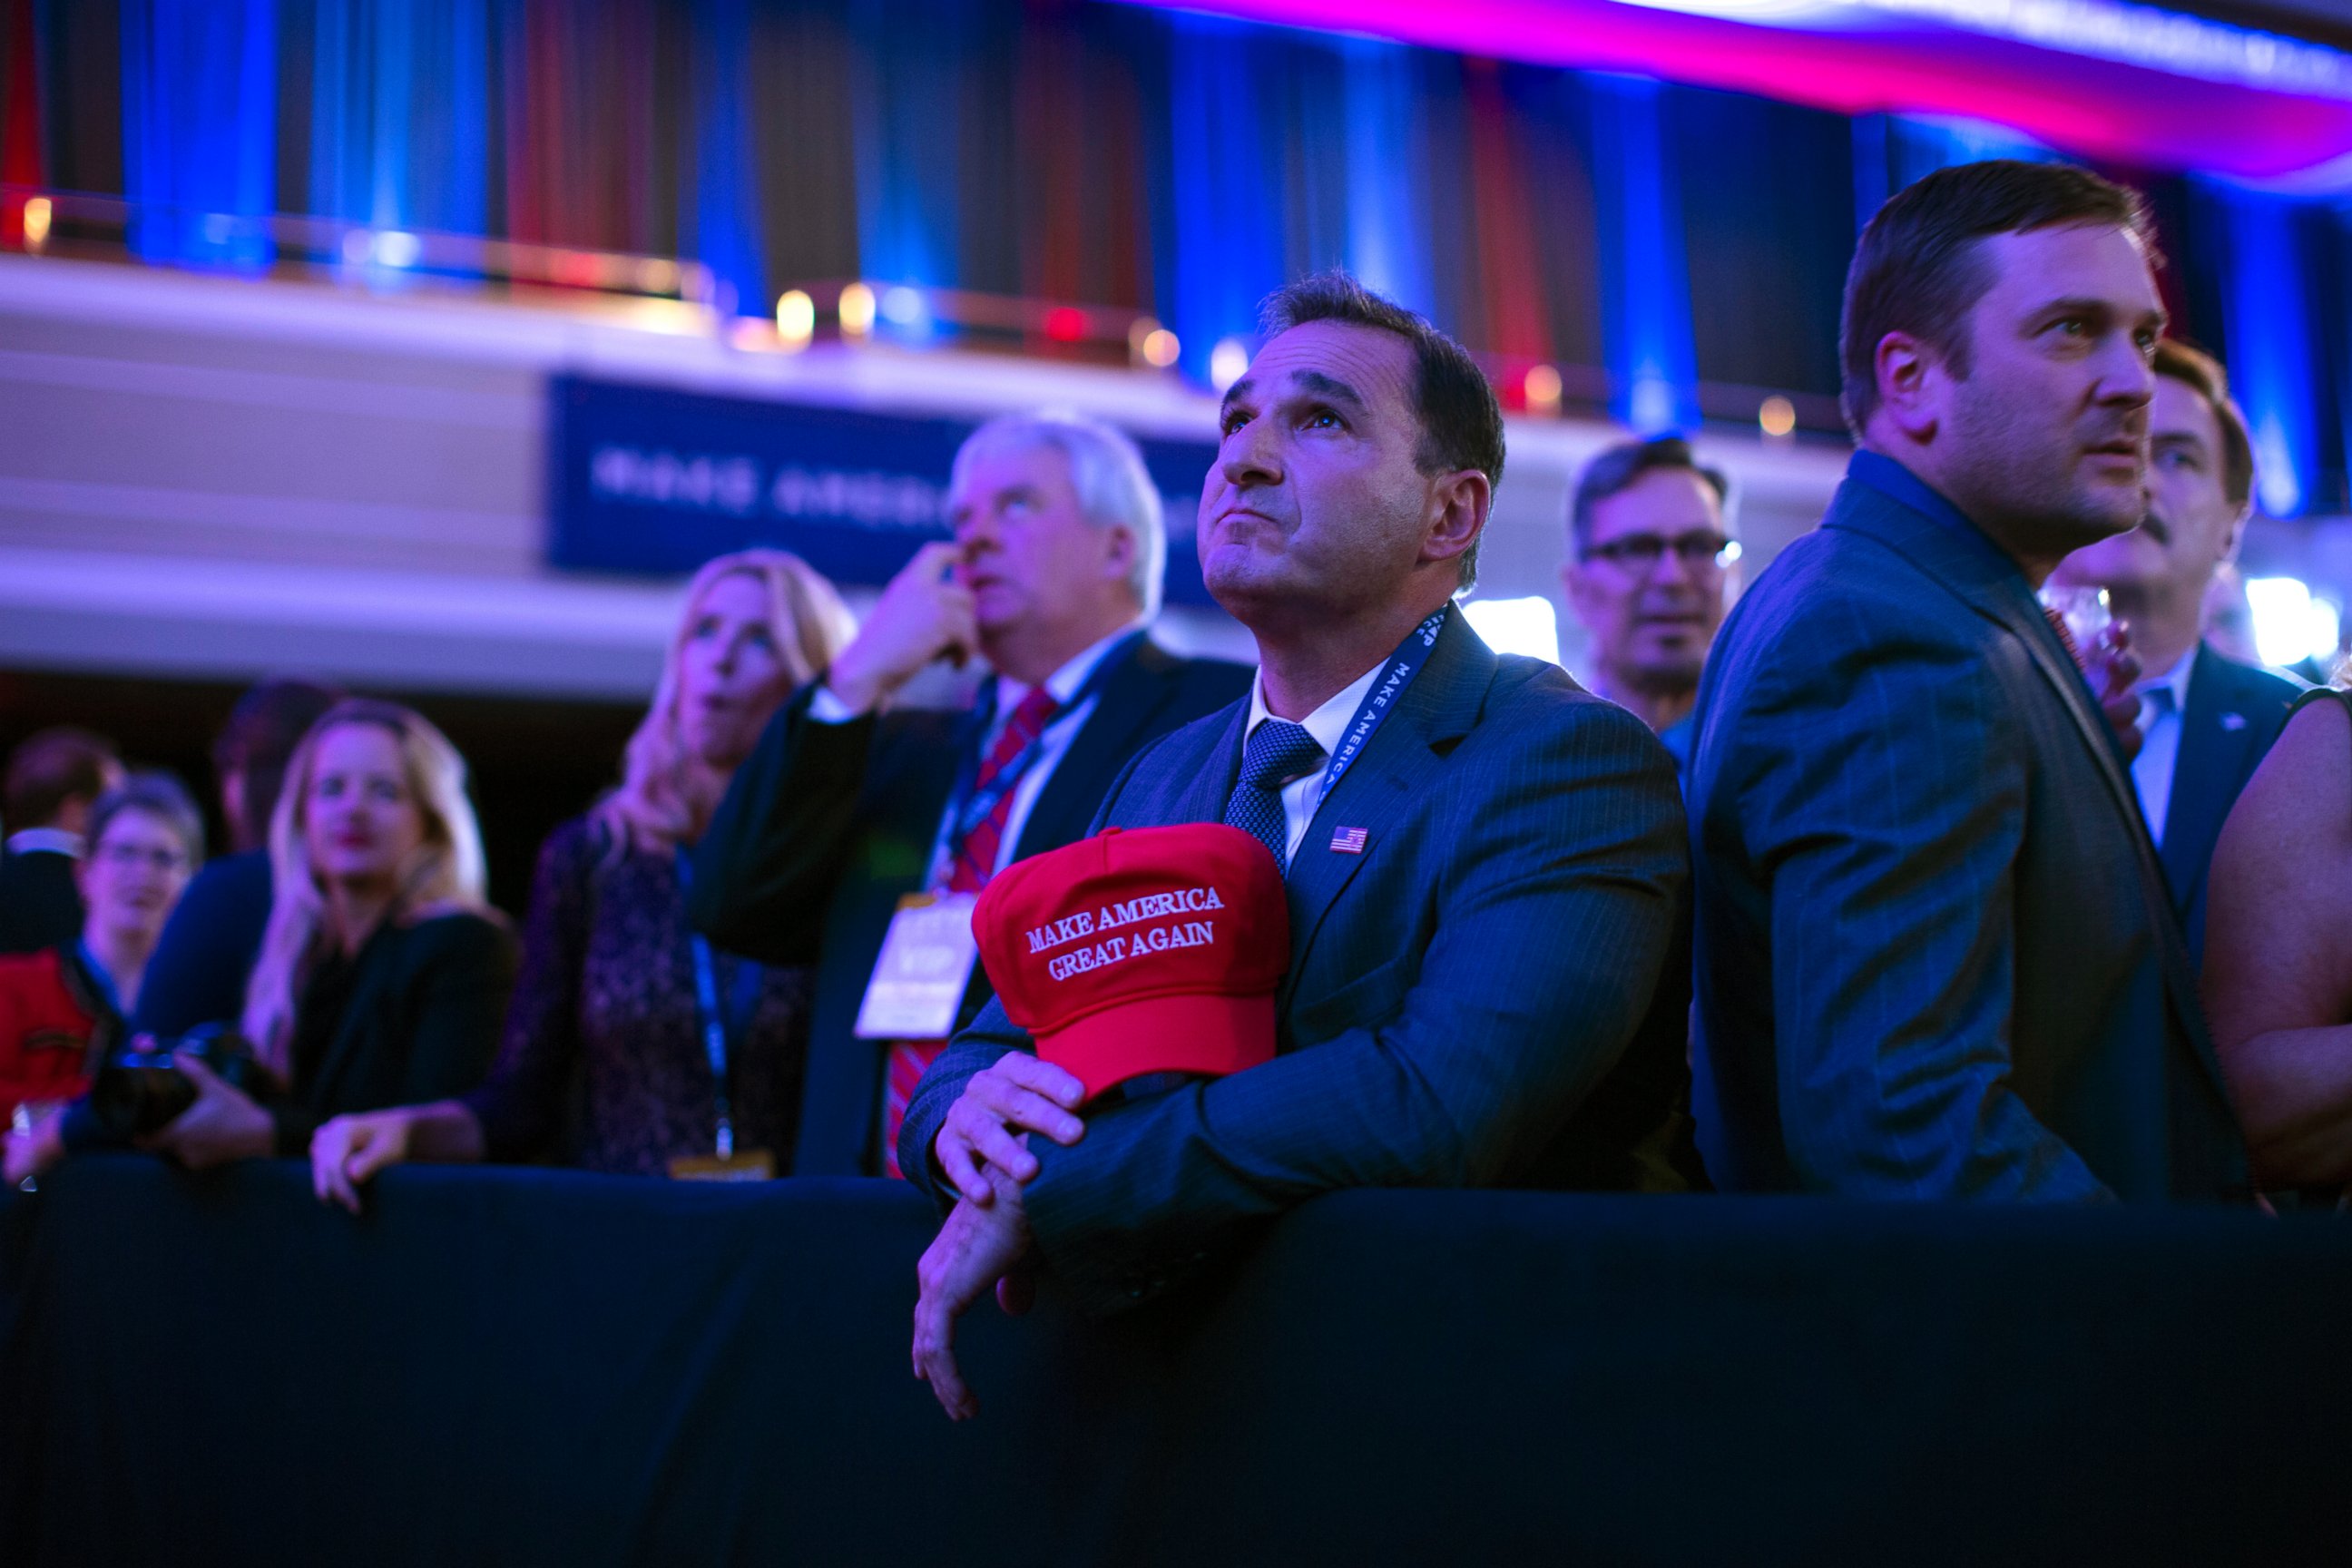 PHOTO: Supporters of Republican presidential candidate Donald Trump watch election results during an election night rally, Nov. 8, 2016, in New York.